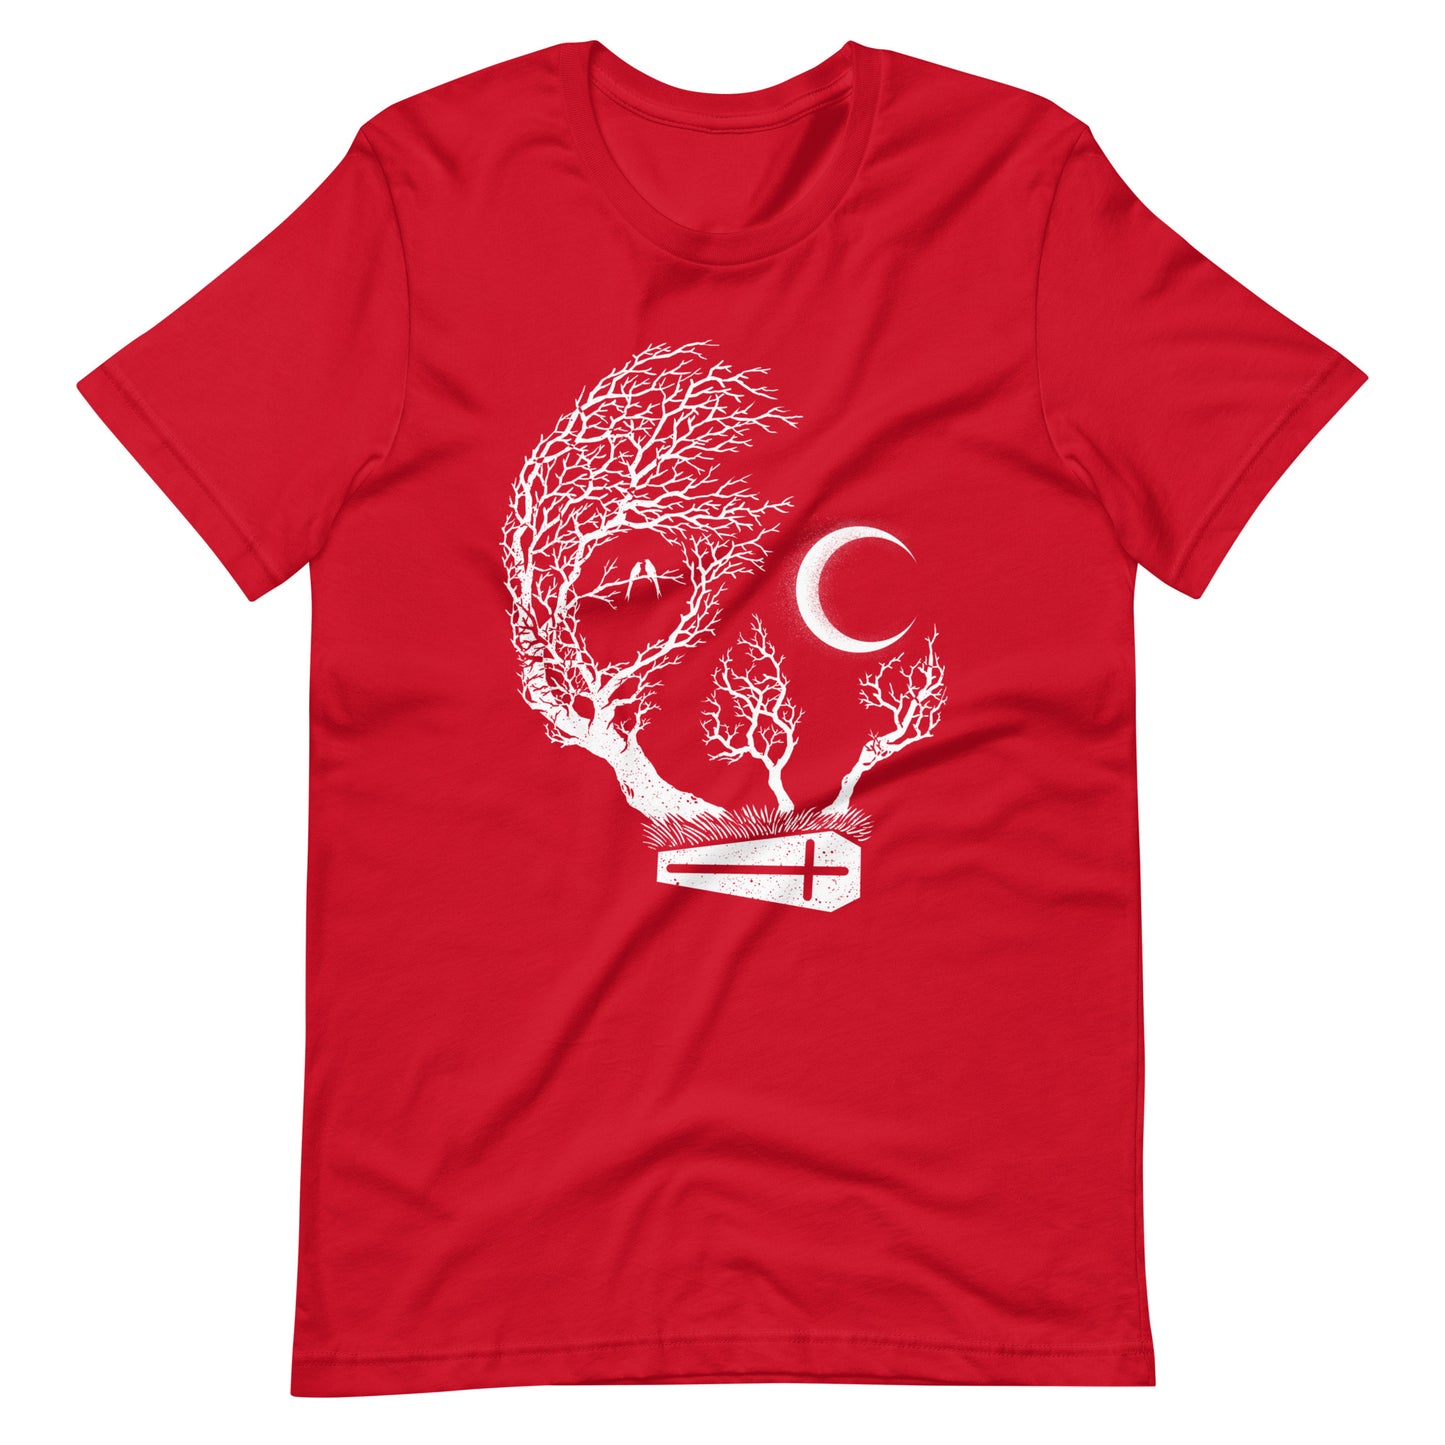 Friday Night Death - Men's t-shirt - Red Front